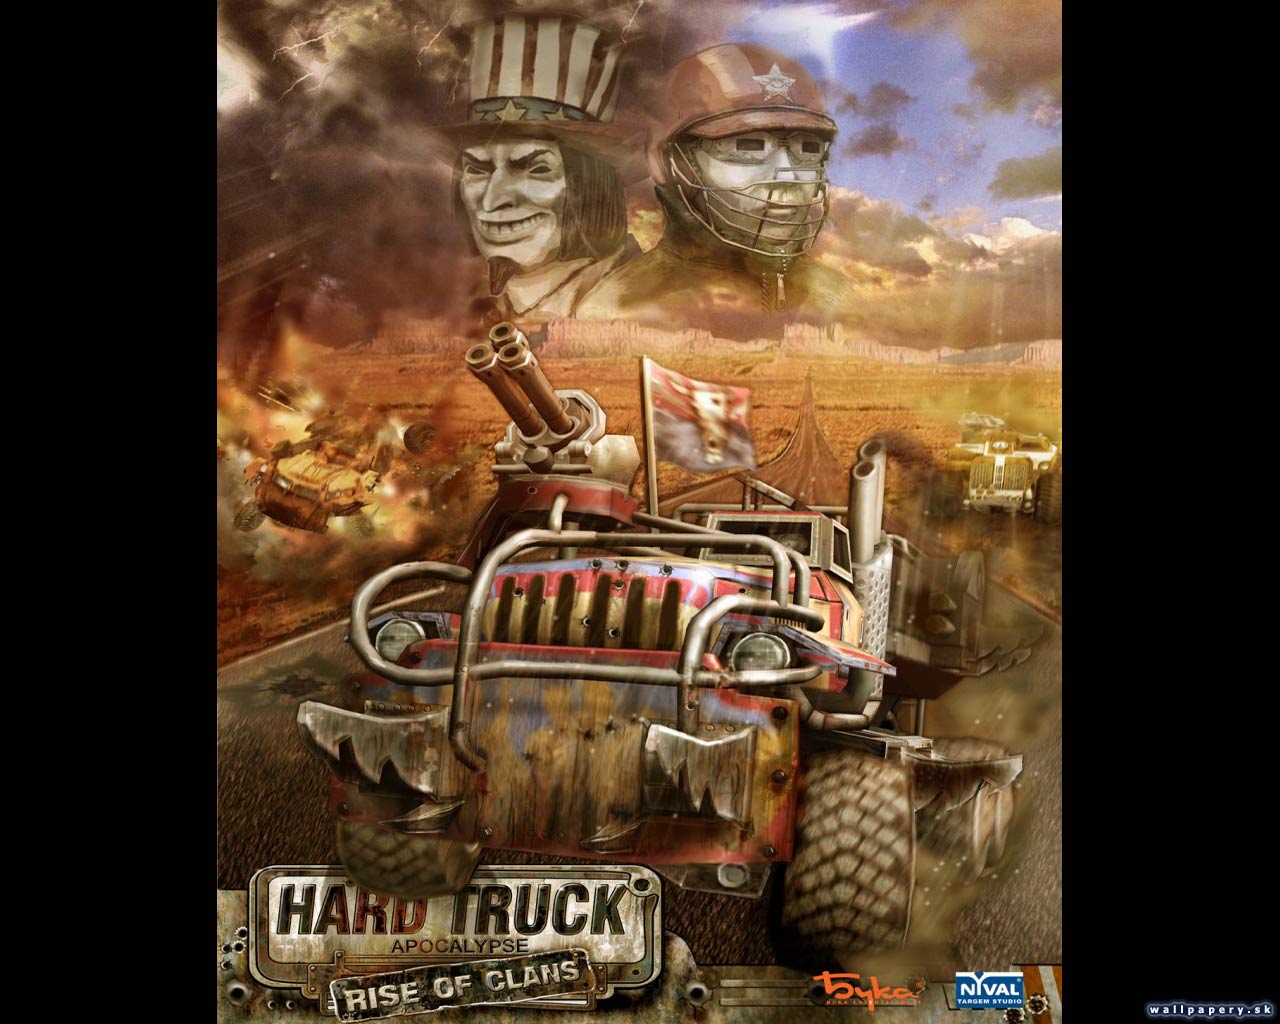 Hard Truck: Apocalypse - Rise of Clans - wallpaper 2